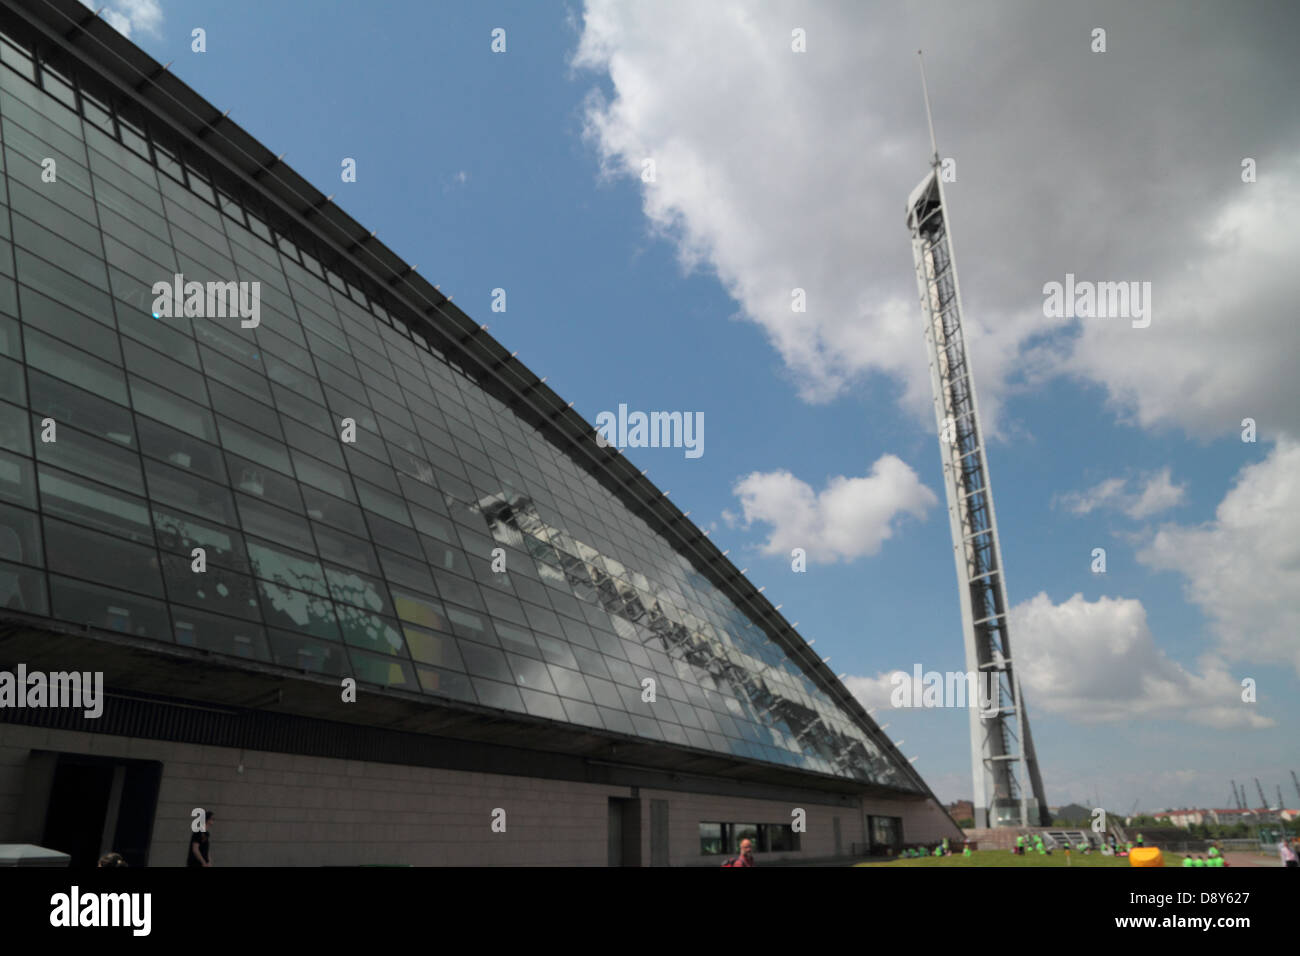 'Glasgow tower', waterside, River Clyde, Auditorium, Clyde Arc, SECC, Science Centre Crowne Plaza. Stock Photo